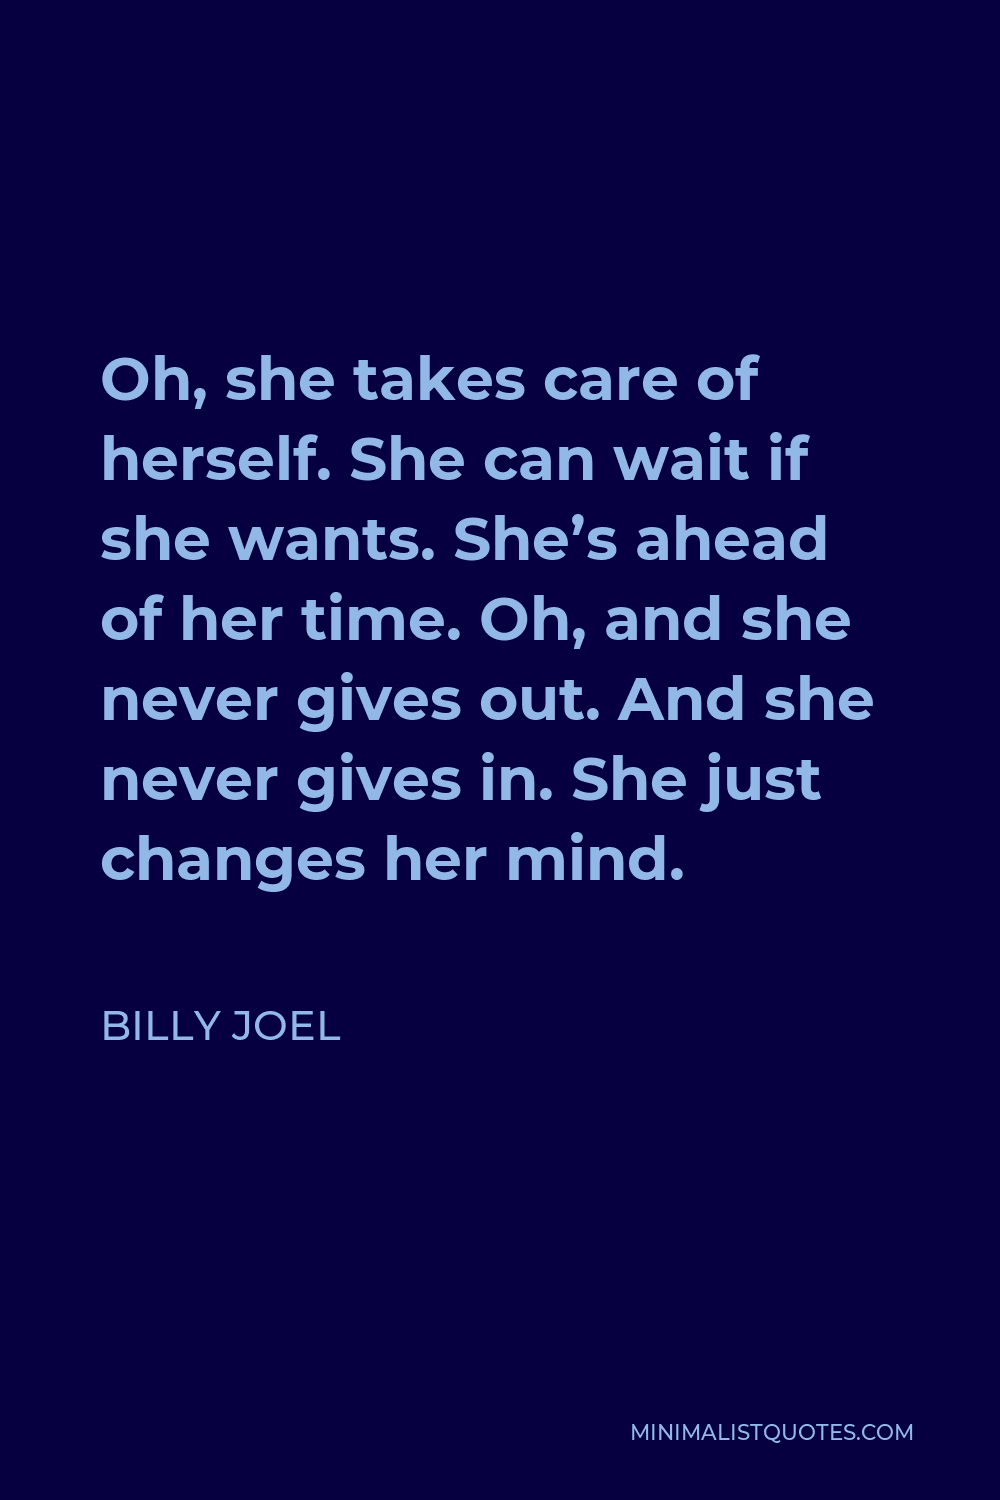 Billy Joel Quote - Oh, she takes care of herself. She can wait if she wants. She’s ahead of her time. Oh, and she never gives out. And she never gives in. She just changes her mind.